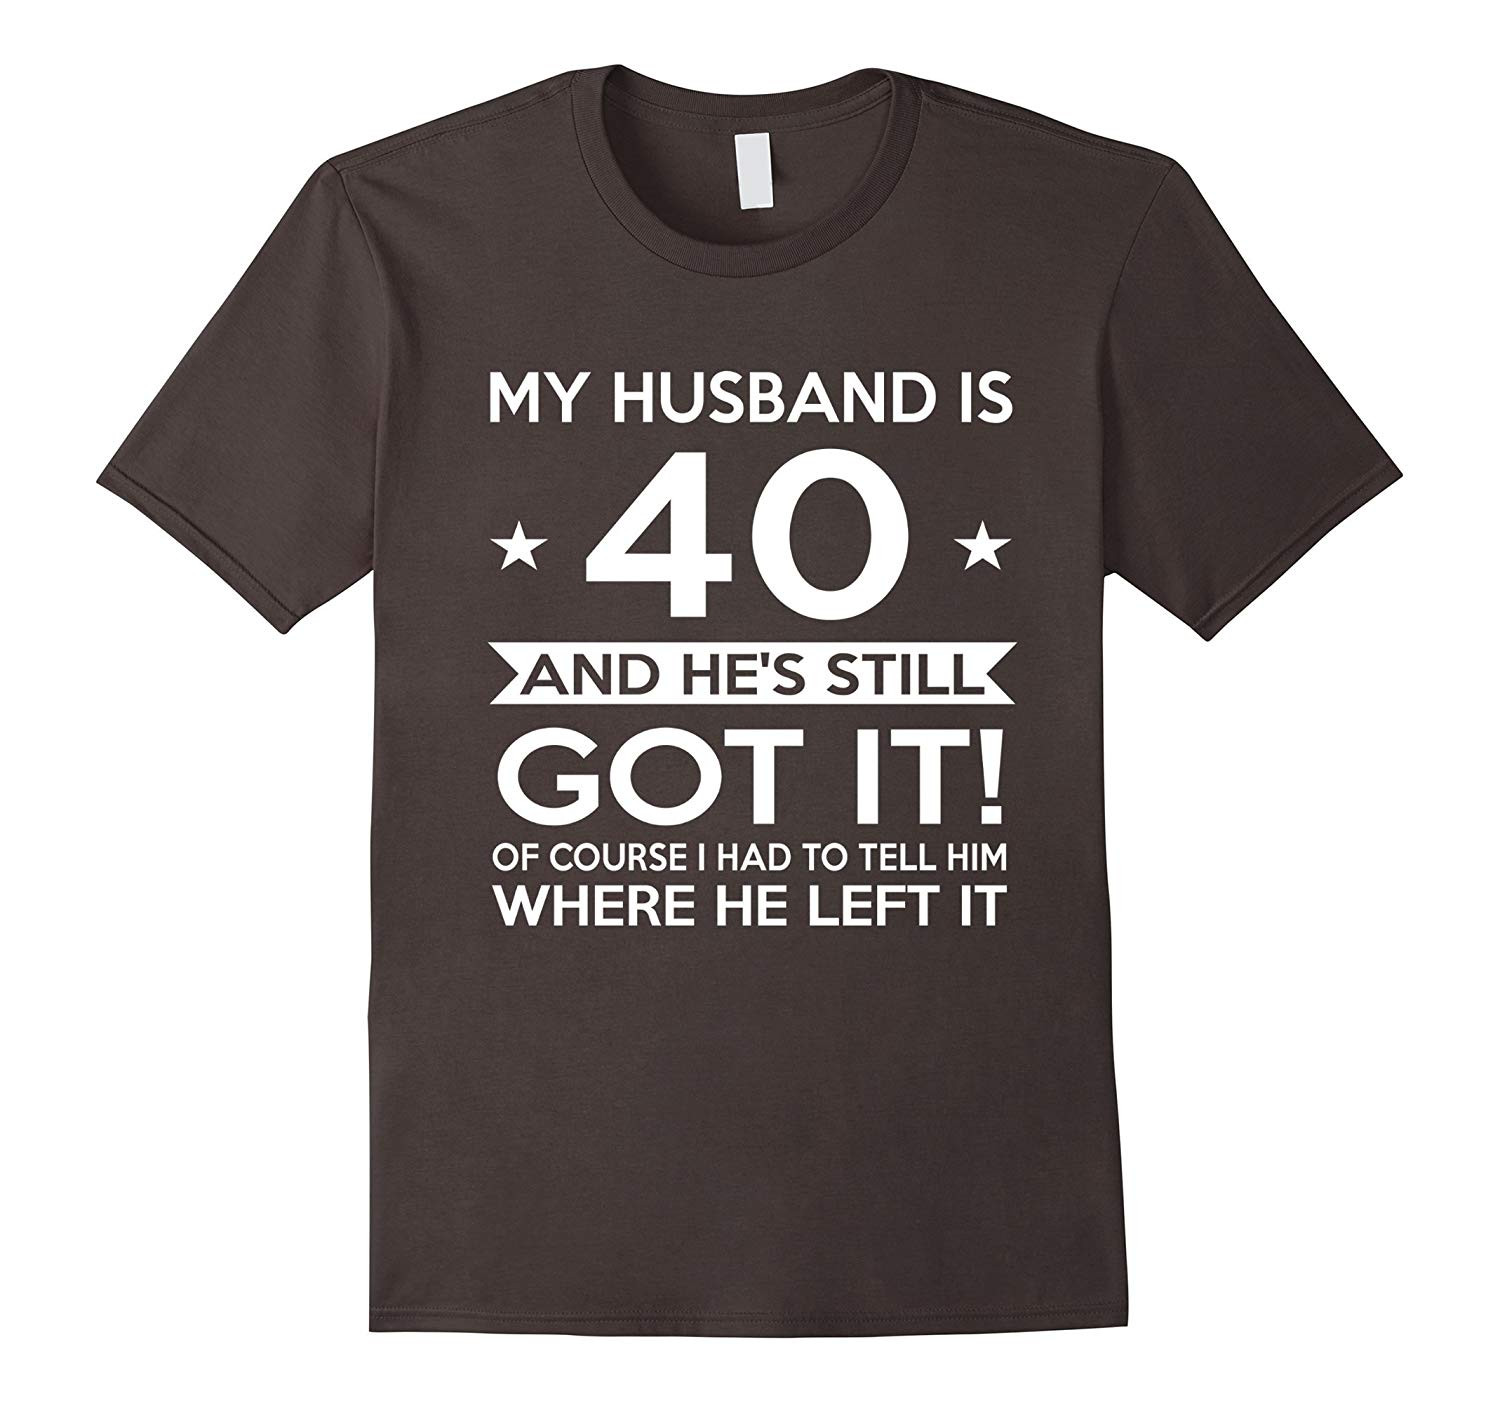 40th Birthday Gifts For Husband
 My Husband is 40 40th Birthday Gift Ideas for him CL